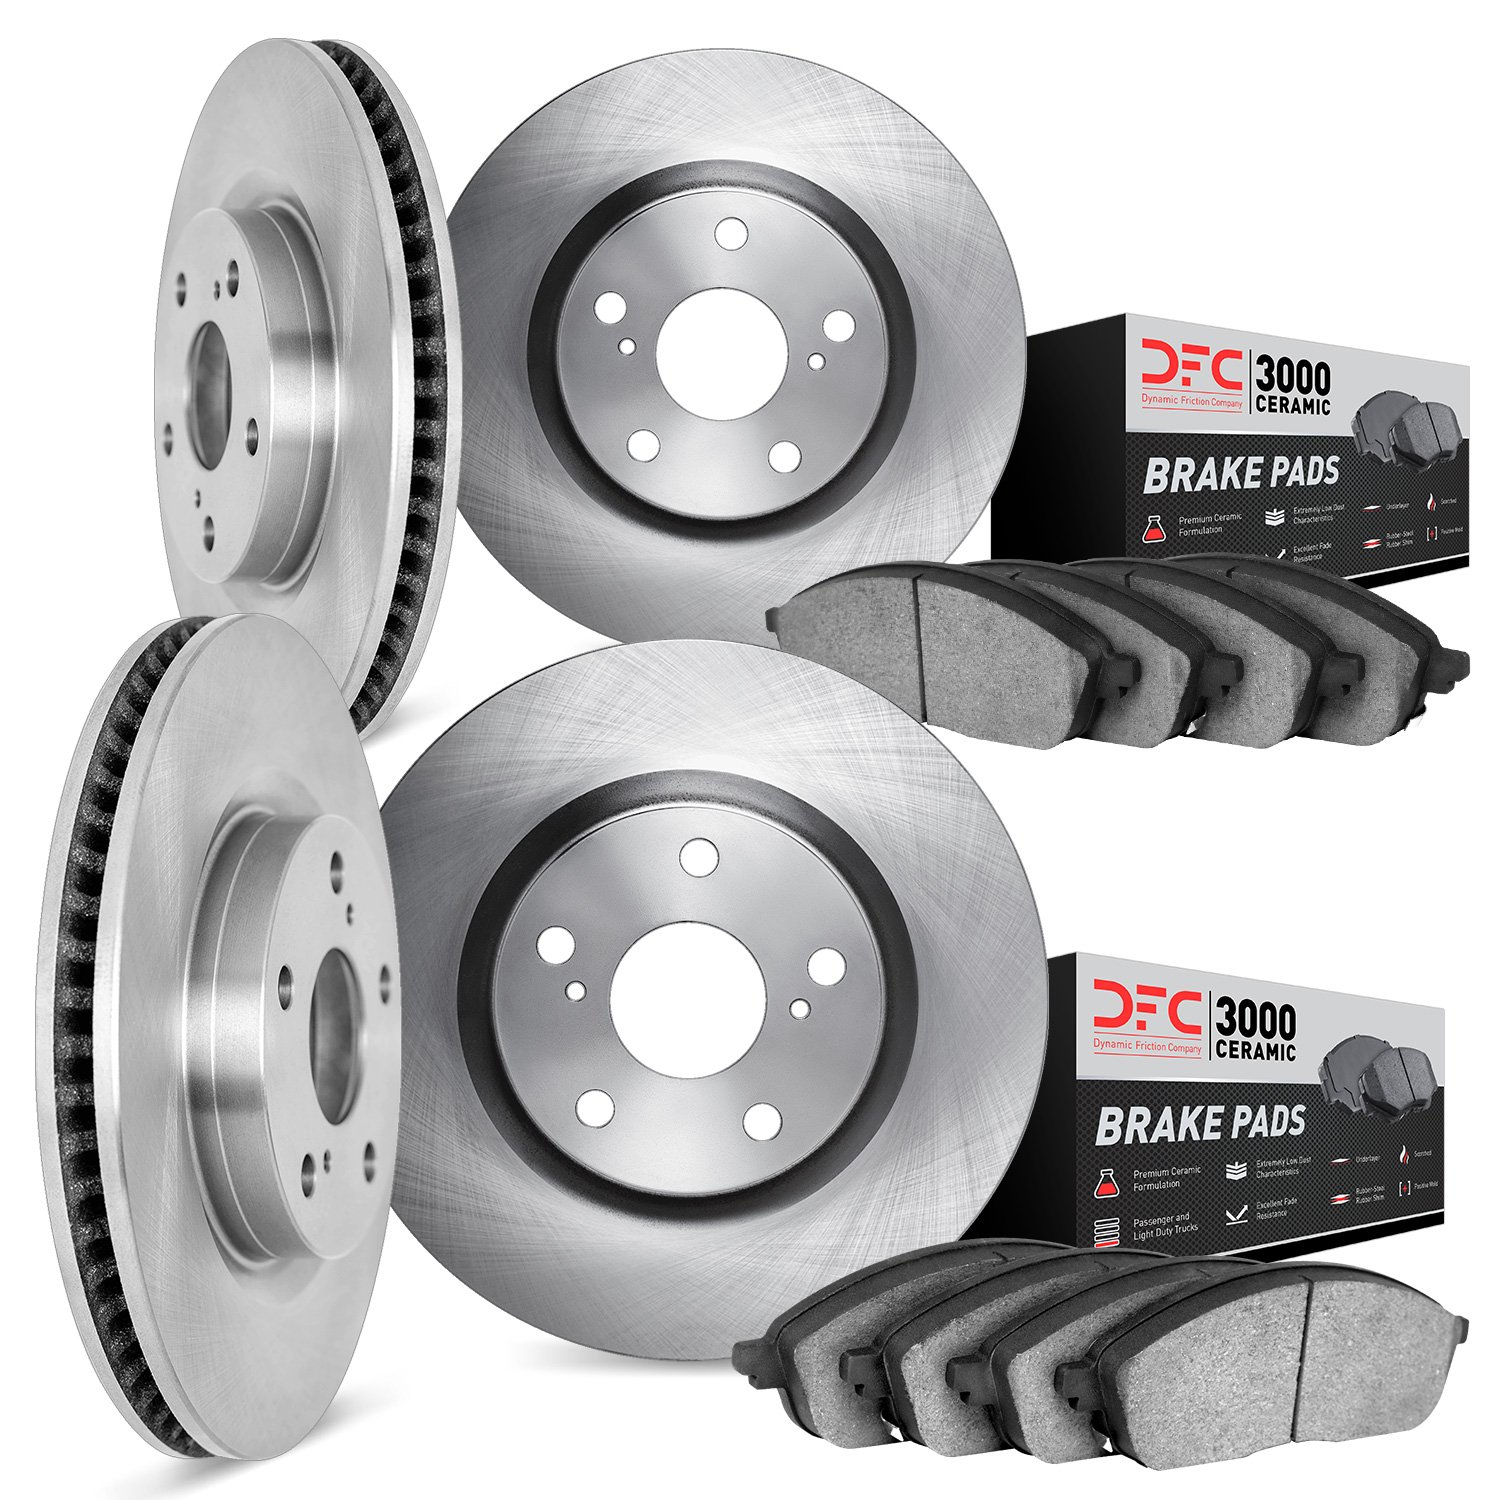 6304-73075 Brake Rotors with 3000-Series Ceramic Brake Pads Kit, 2014-2017 Audi/Volkswagen, Position: Front and Rear